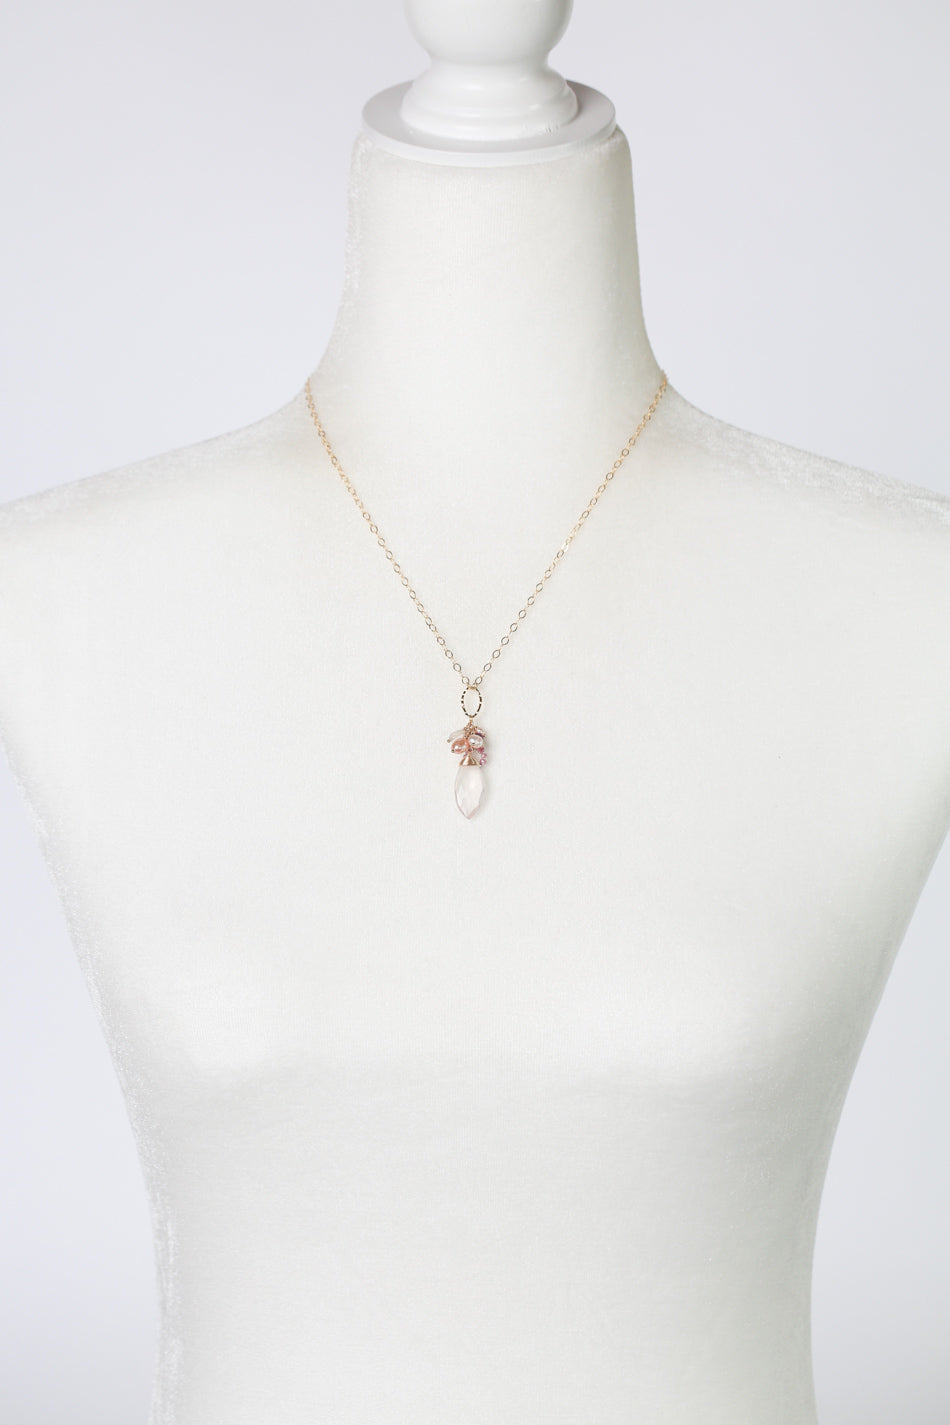 Hope 17.5-19.5" Pearl, Ruby, Pink Moonstone With Rose Quartz Cluster Necklace